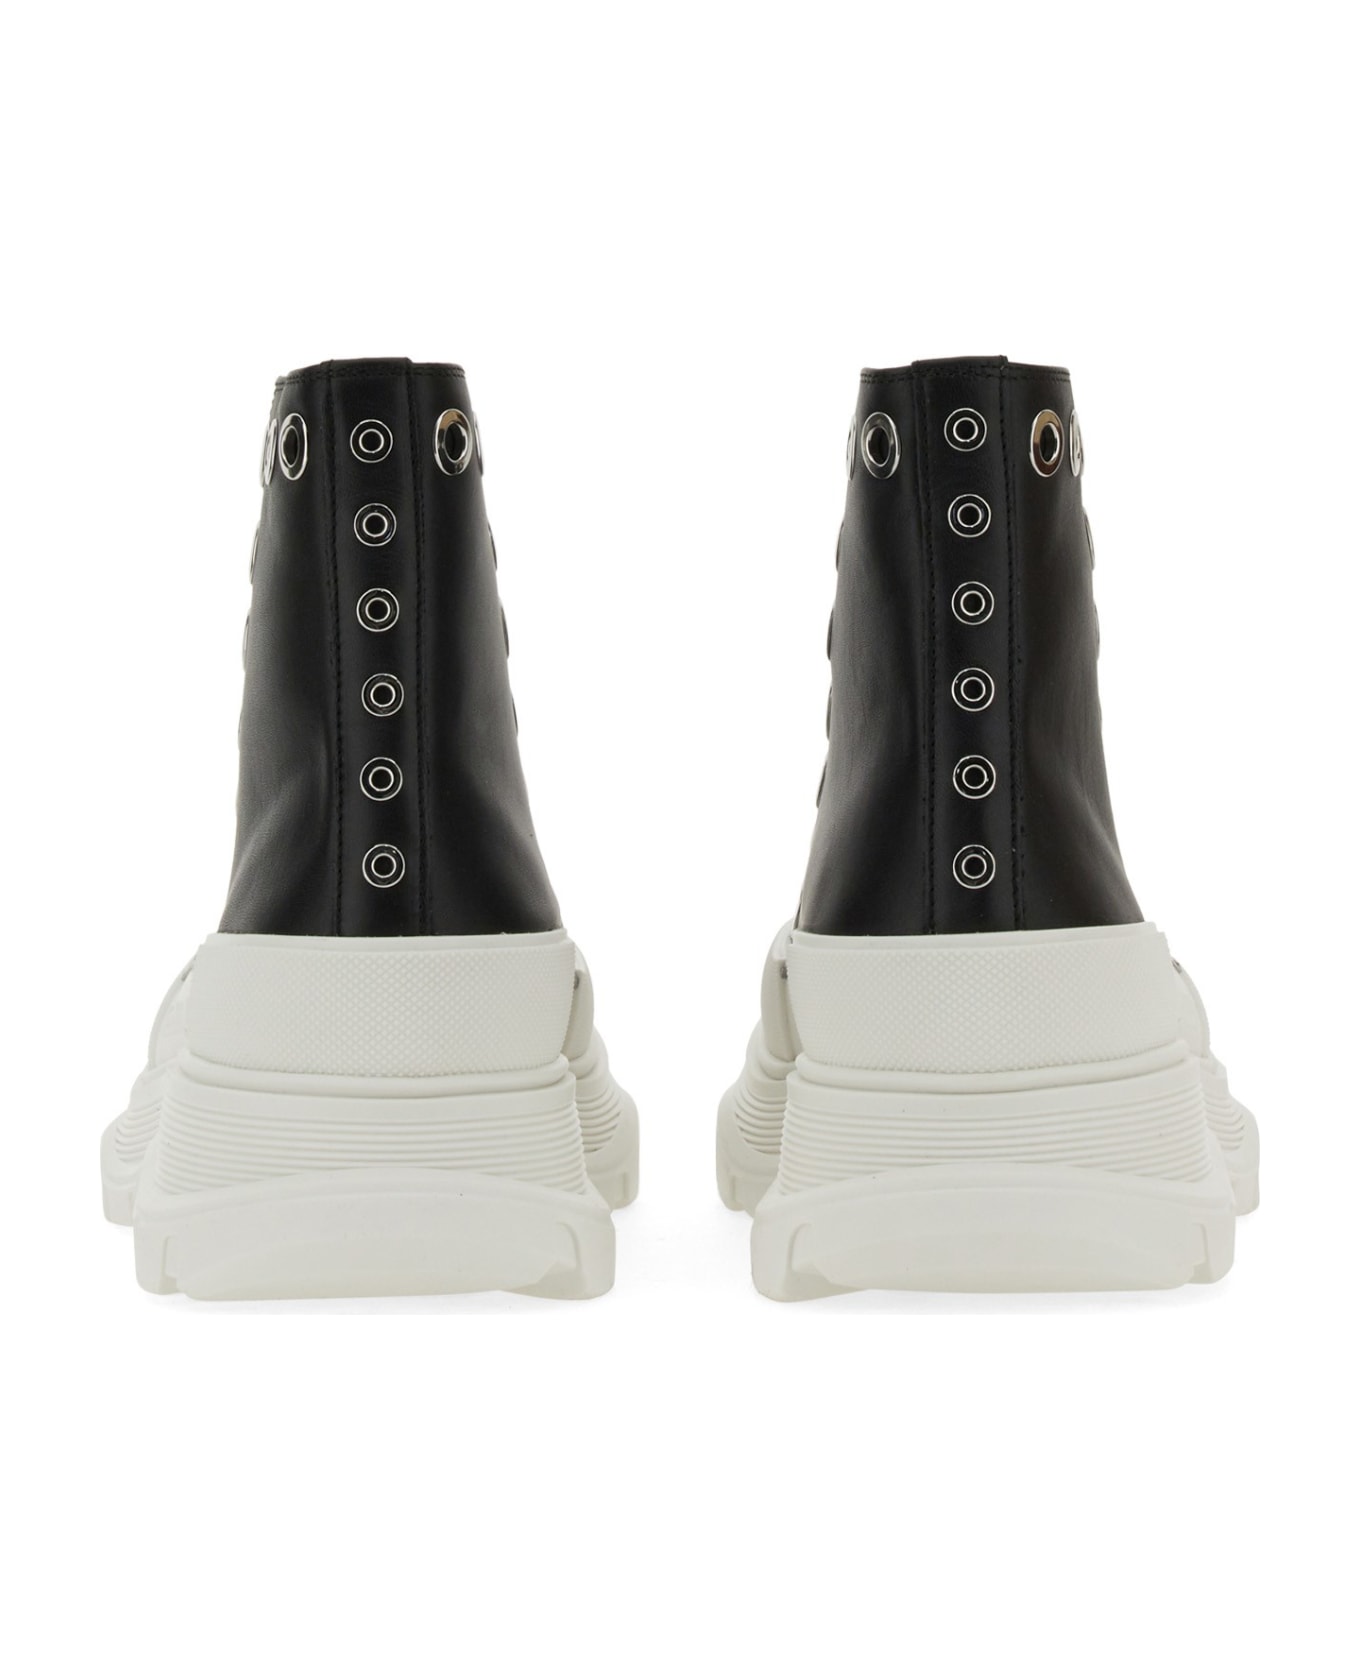 Alexander McQueen Joey Sneaker With Eyelets - Blk Of Wh Blk Sil スニーカー